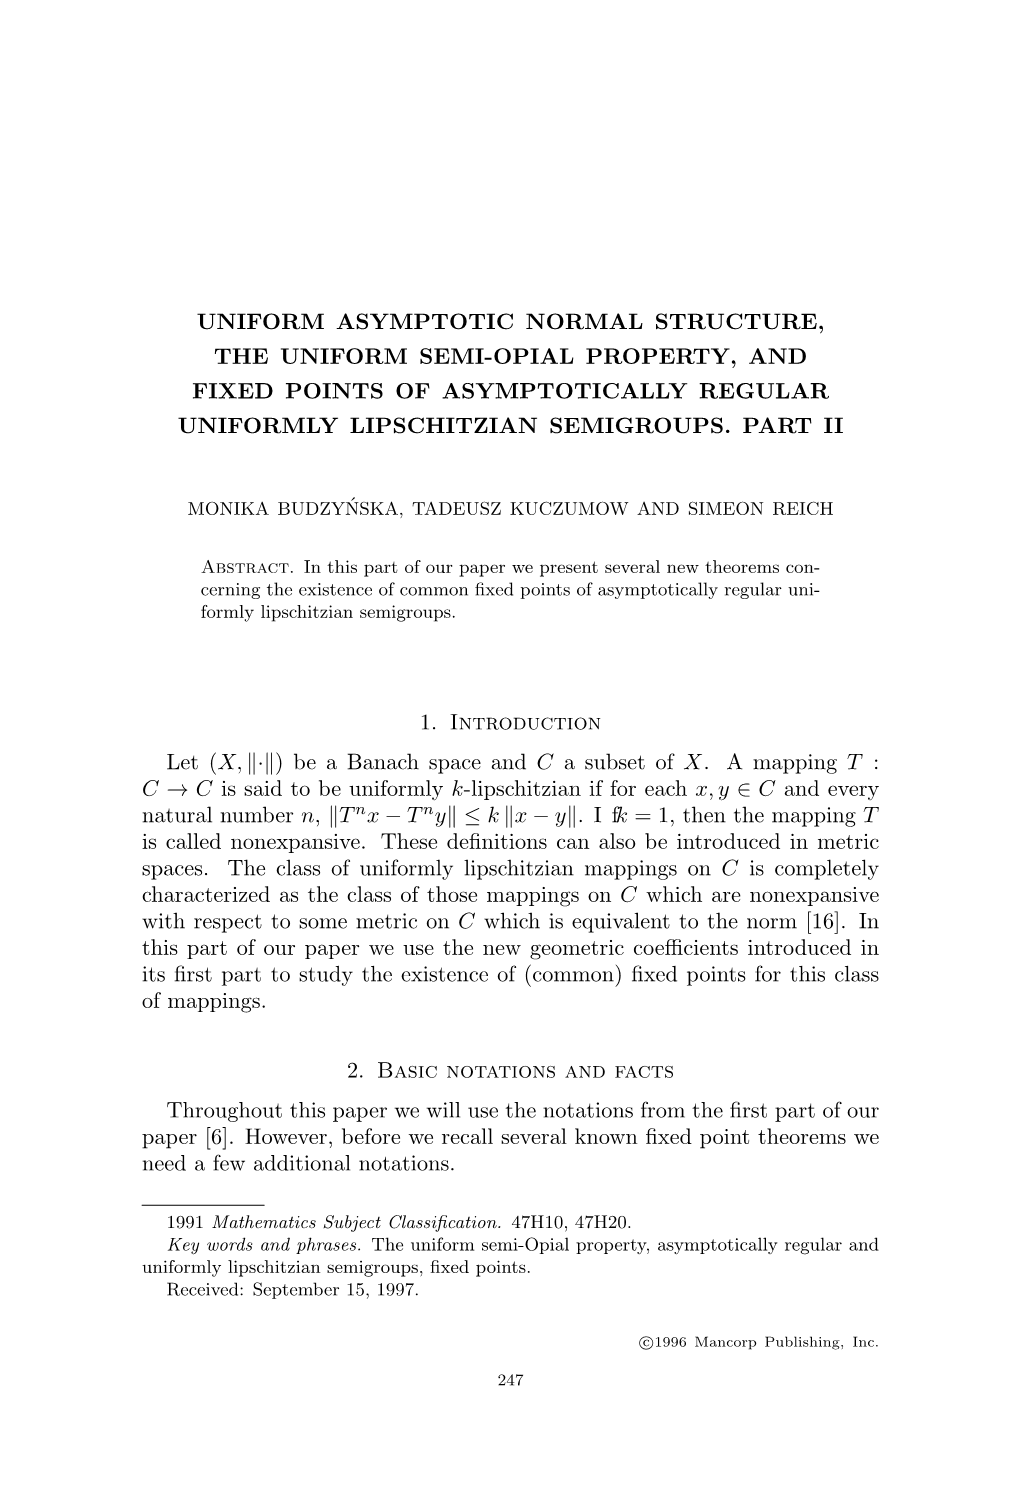 Uniform Asymptotic Normal Structure, the Uniform Semi-Opial Property, and Fixed Points of Asymptotically Regular Uniformly Lipschitzian Semigroups